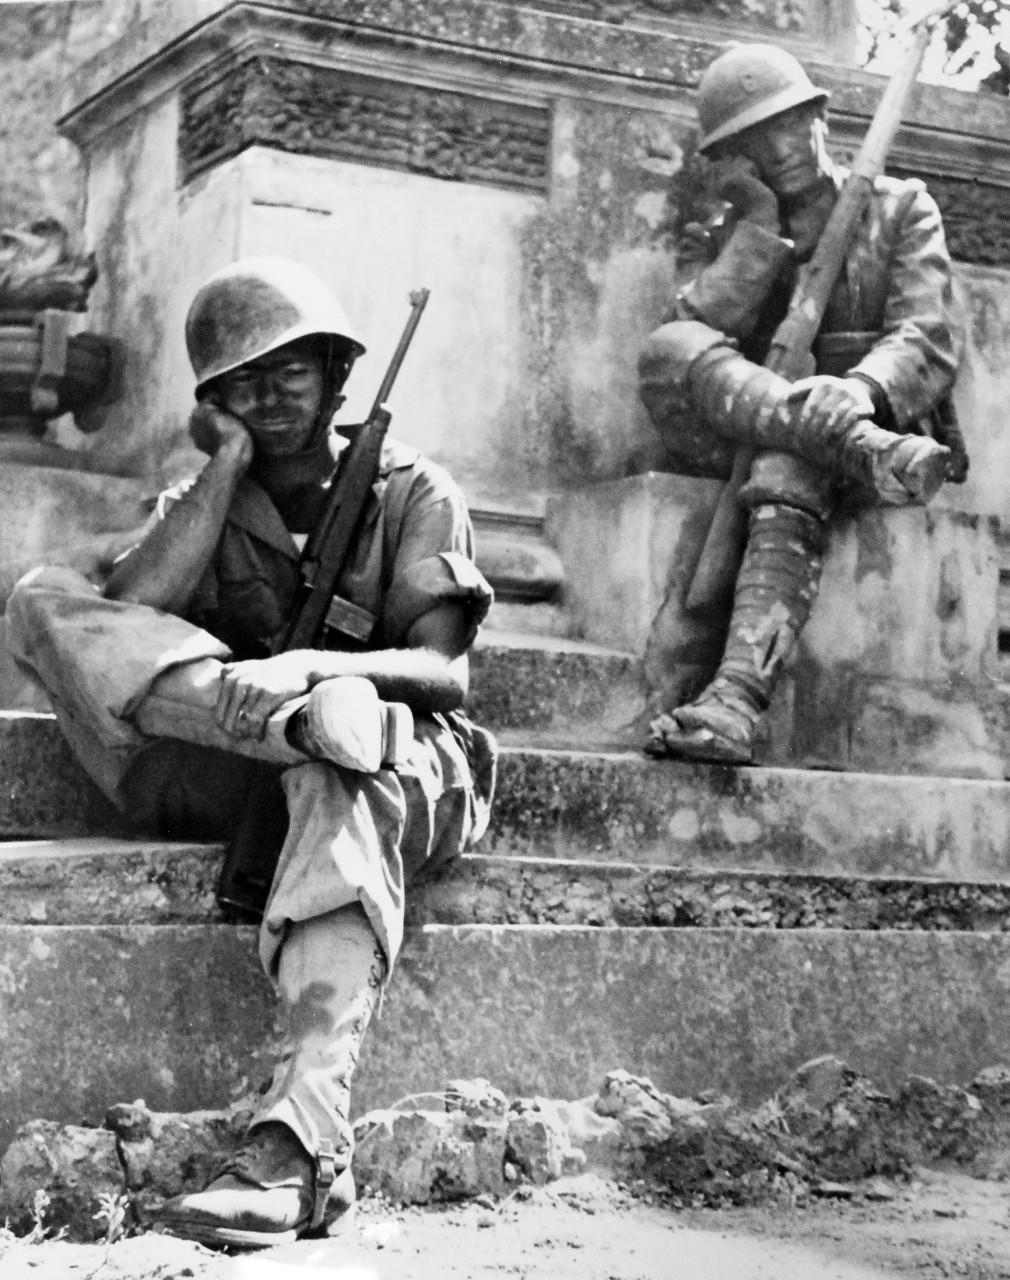 LC-USZ62-98977: Operation Husky - Invasion of Sicily, Italy, July-August 1943.  Study in Still Life.  Tired and foot-weary from his march to Brolo, Sicily, Sergeant Norwood Dorman falls into the pose of the statue in this memorial to the Italian soldier of World War I.     U.S. Army Photograph.  Photographed through Mylar sleeve.  Courtesy of the Library of Congress:  Lot-805. (2015/10/30).